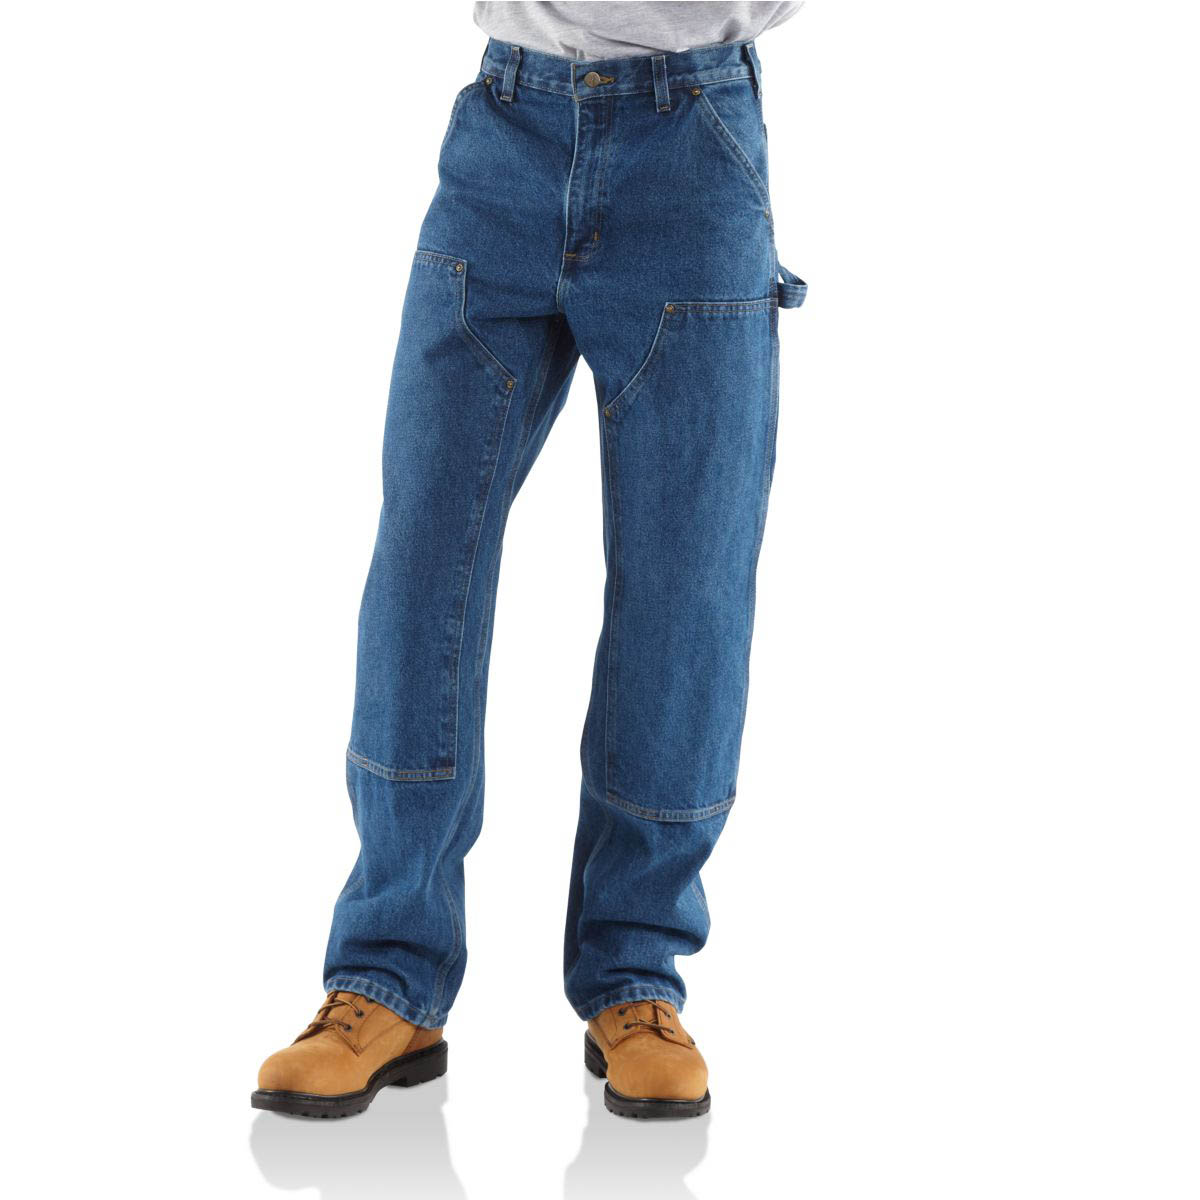 mens dungaree jeans